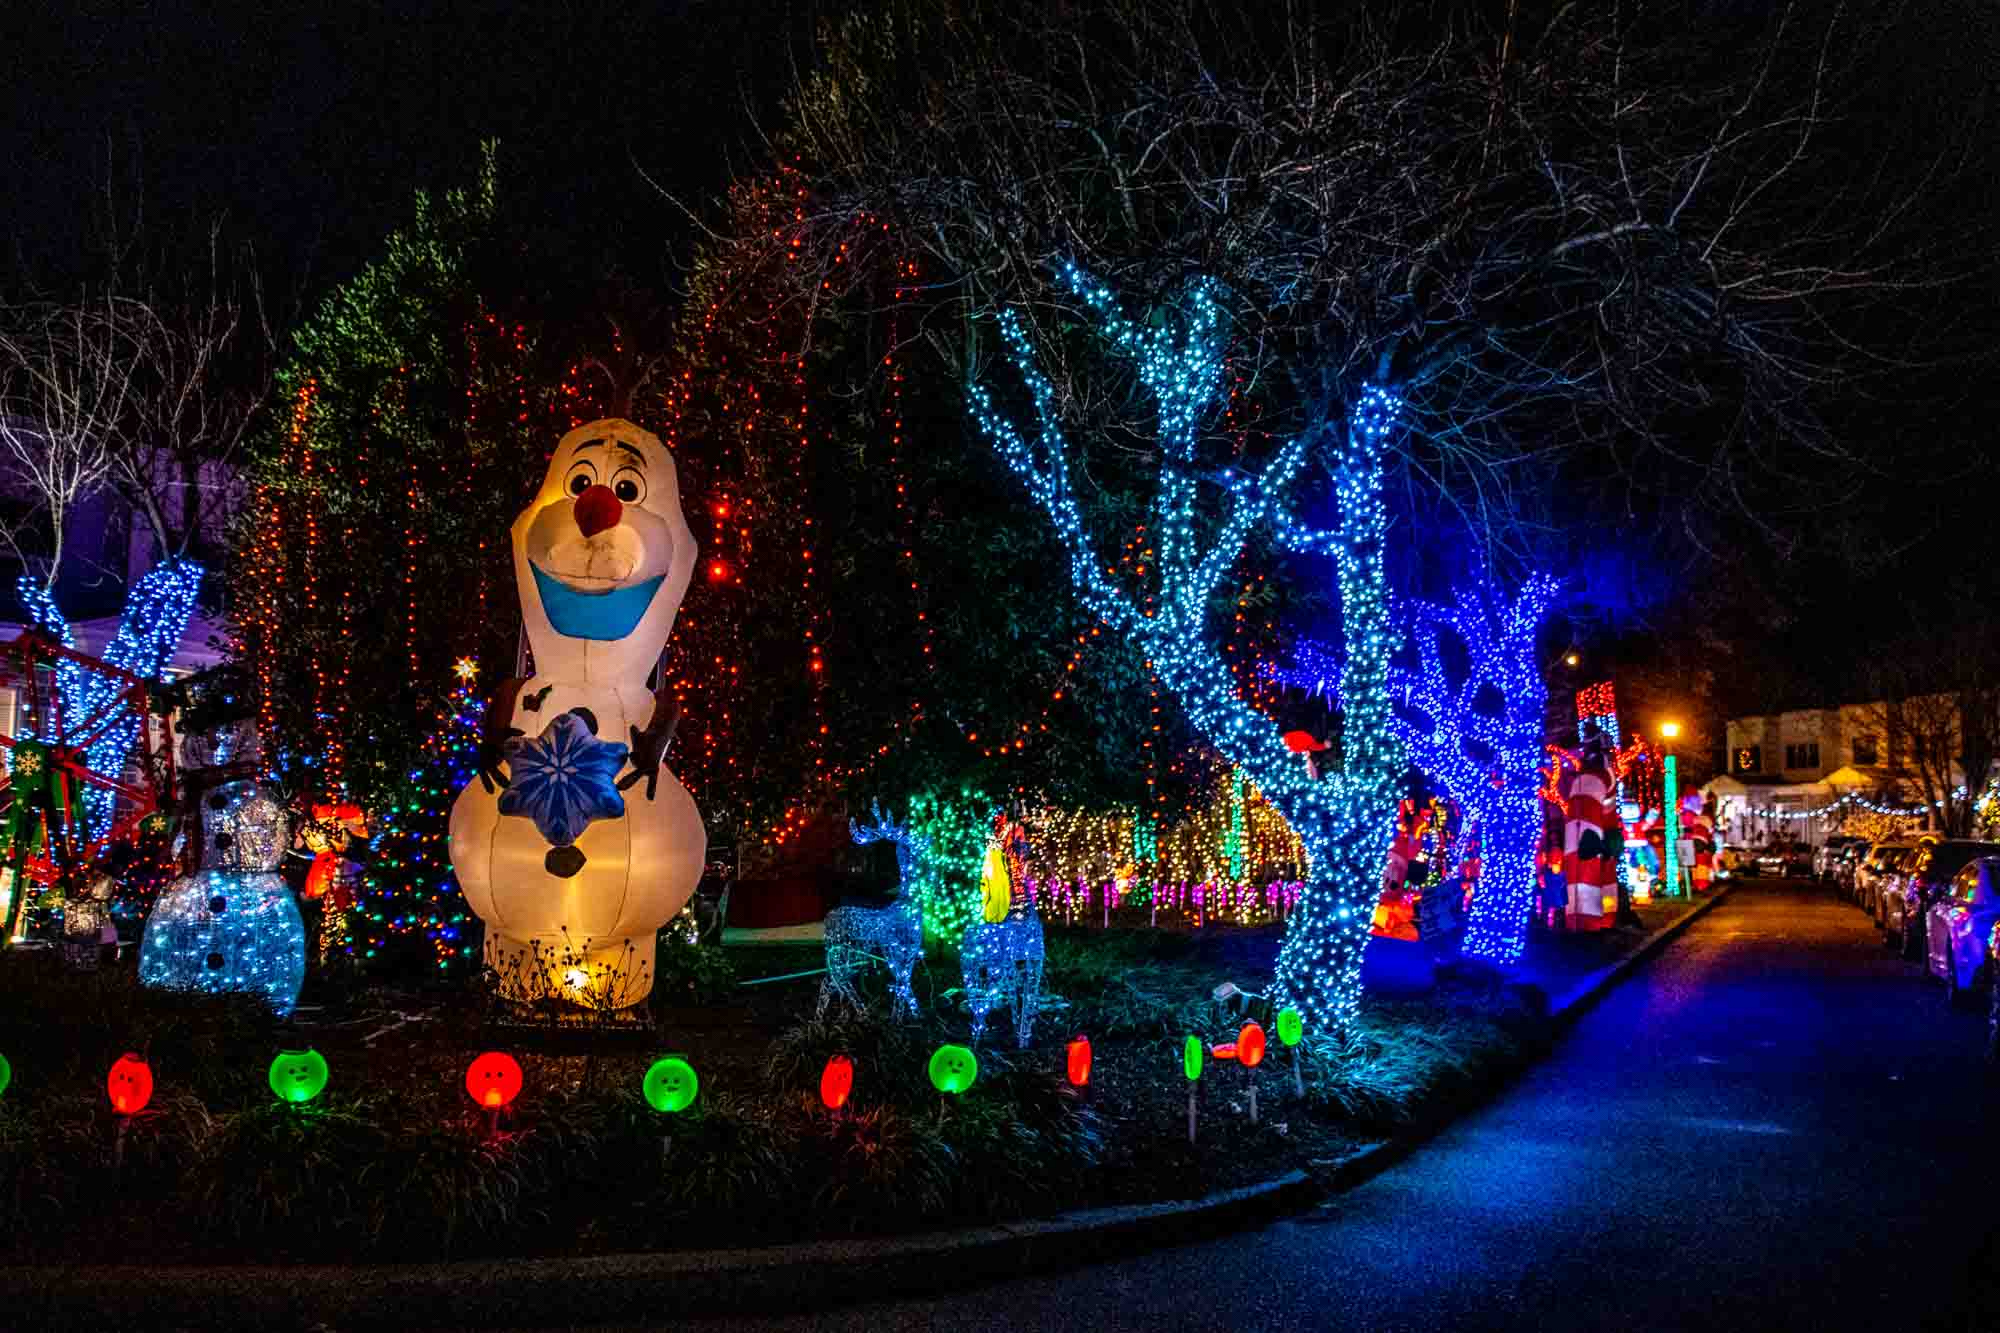 Lit up inflatable snowman beside trees covered in Christmas lights